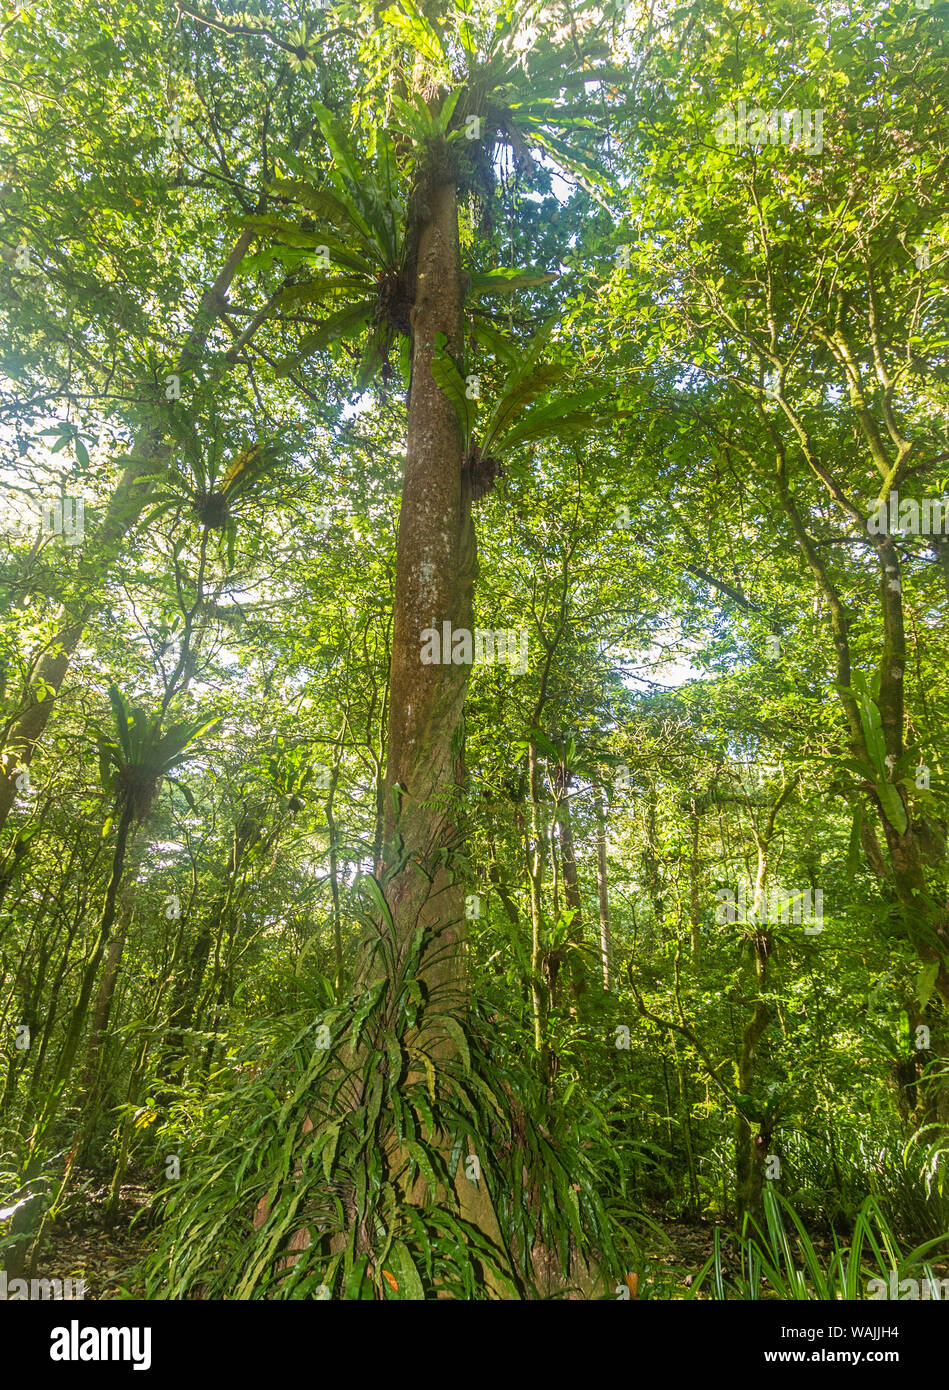 Kosrae, Micronesia. Ka tree covered with ferns in Yela, a protected ka forest. The trees, which can grow to 80 feet with a 30 foot wide buttress at the base, are found only on Kosrae and Pohnpei. Stock Photo